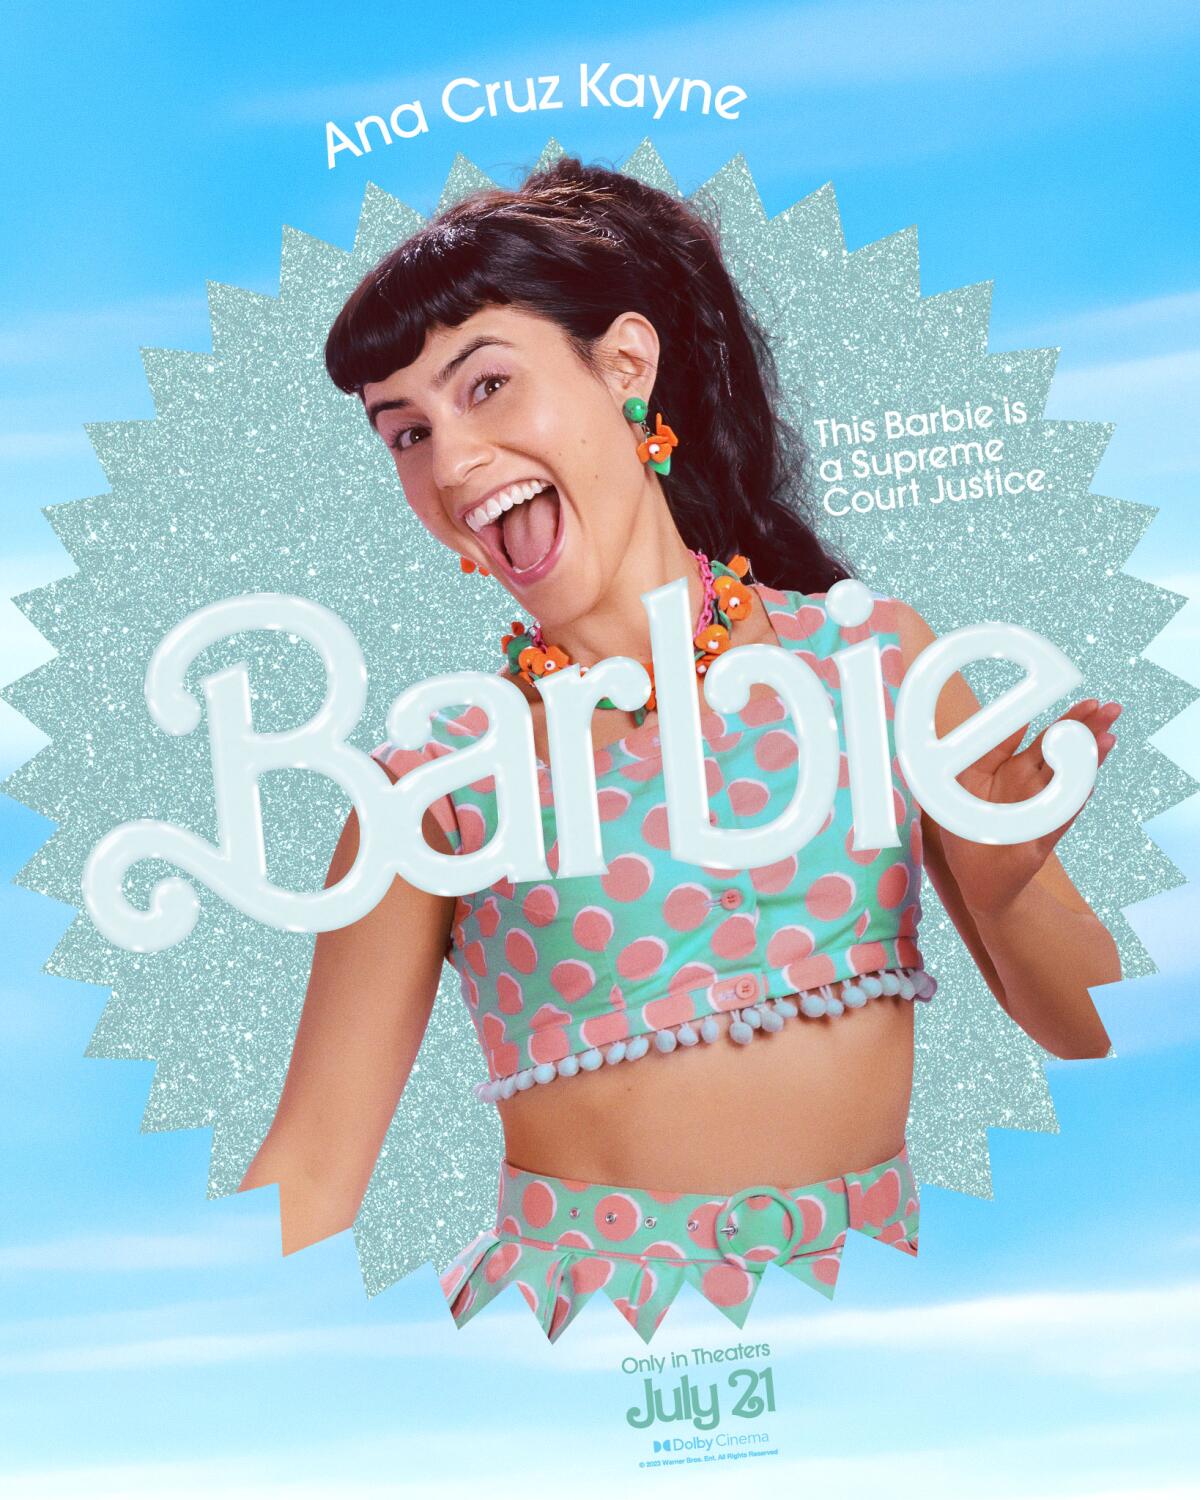 Ana Cruz Kayne smiles in a polka-dot outfit in a movie poster for "Barbie."